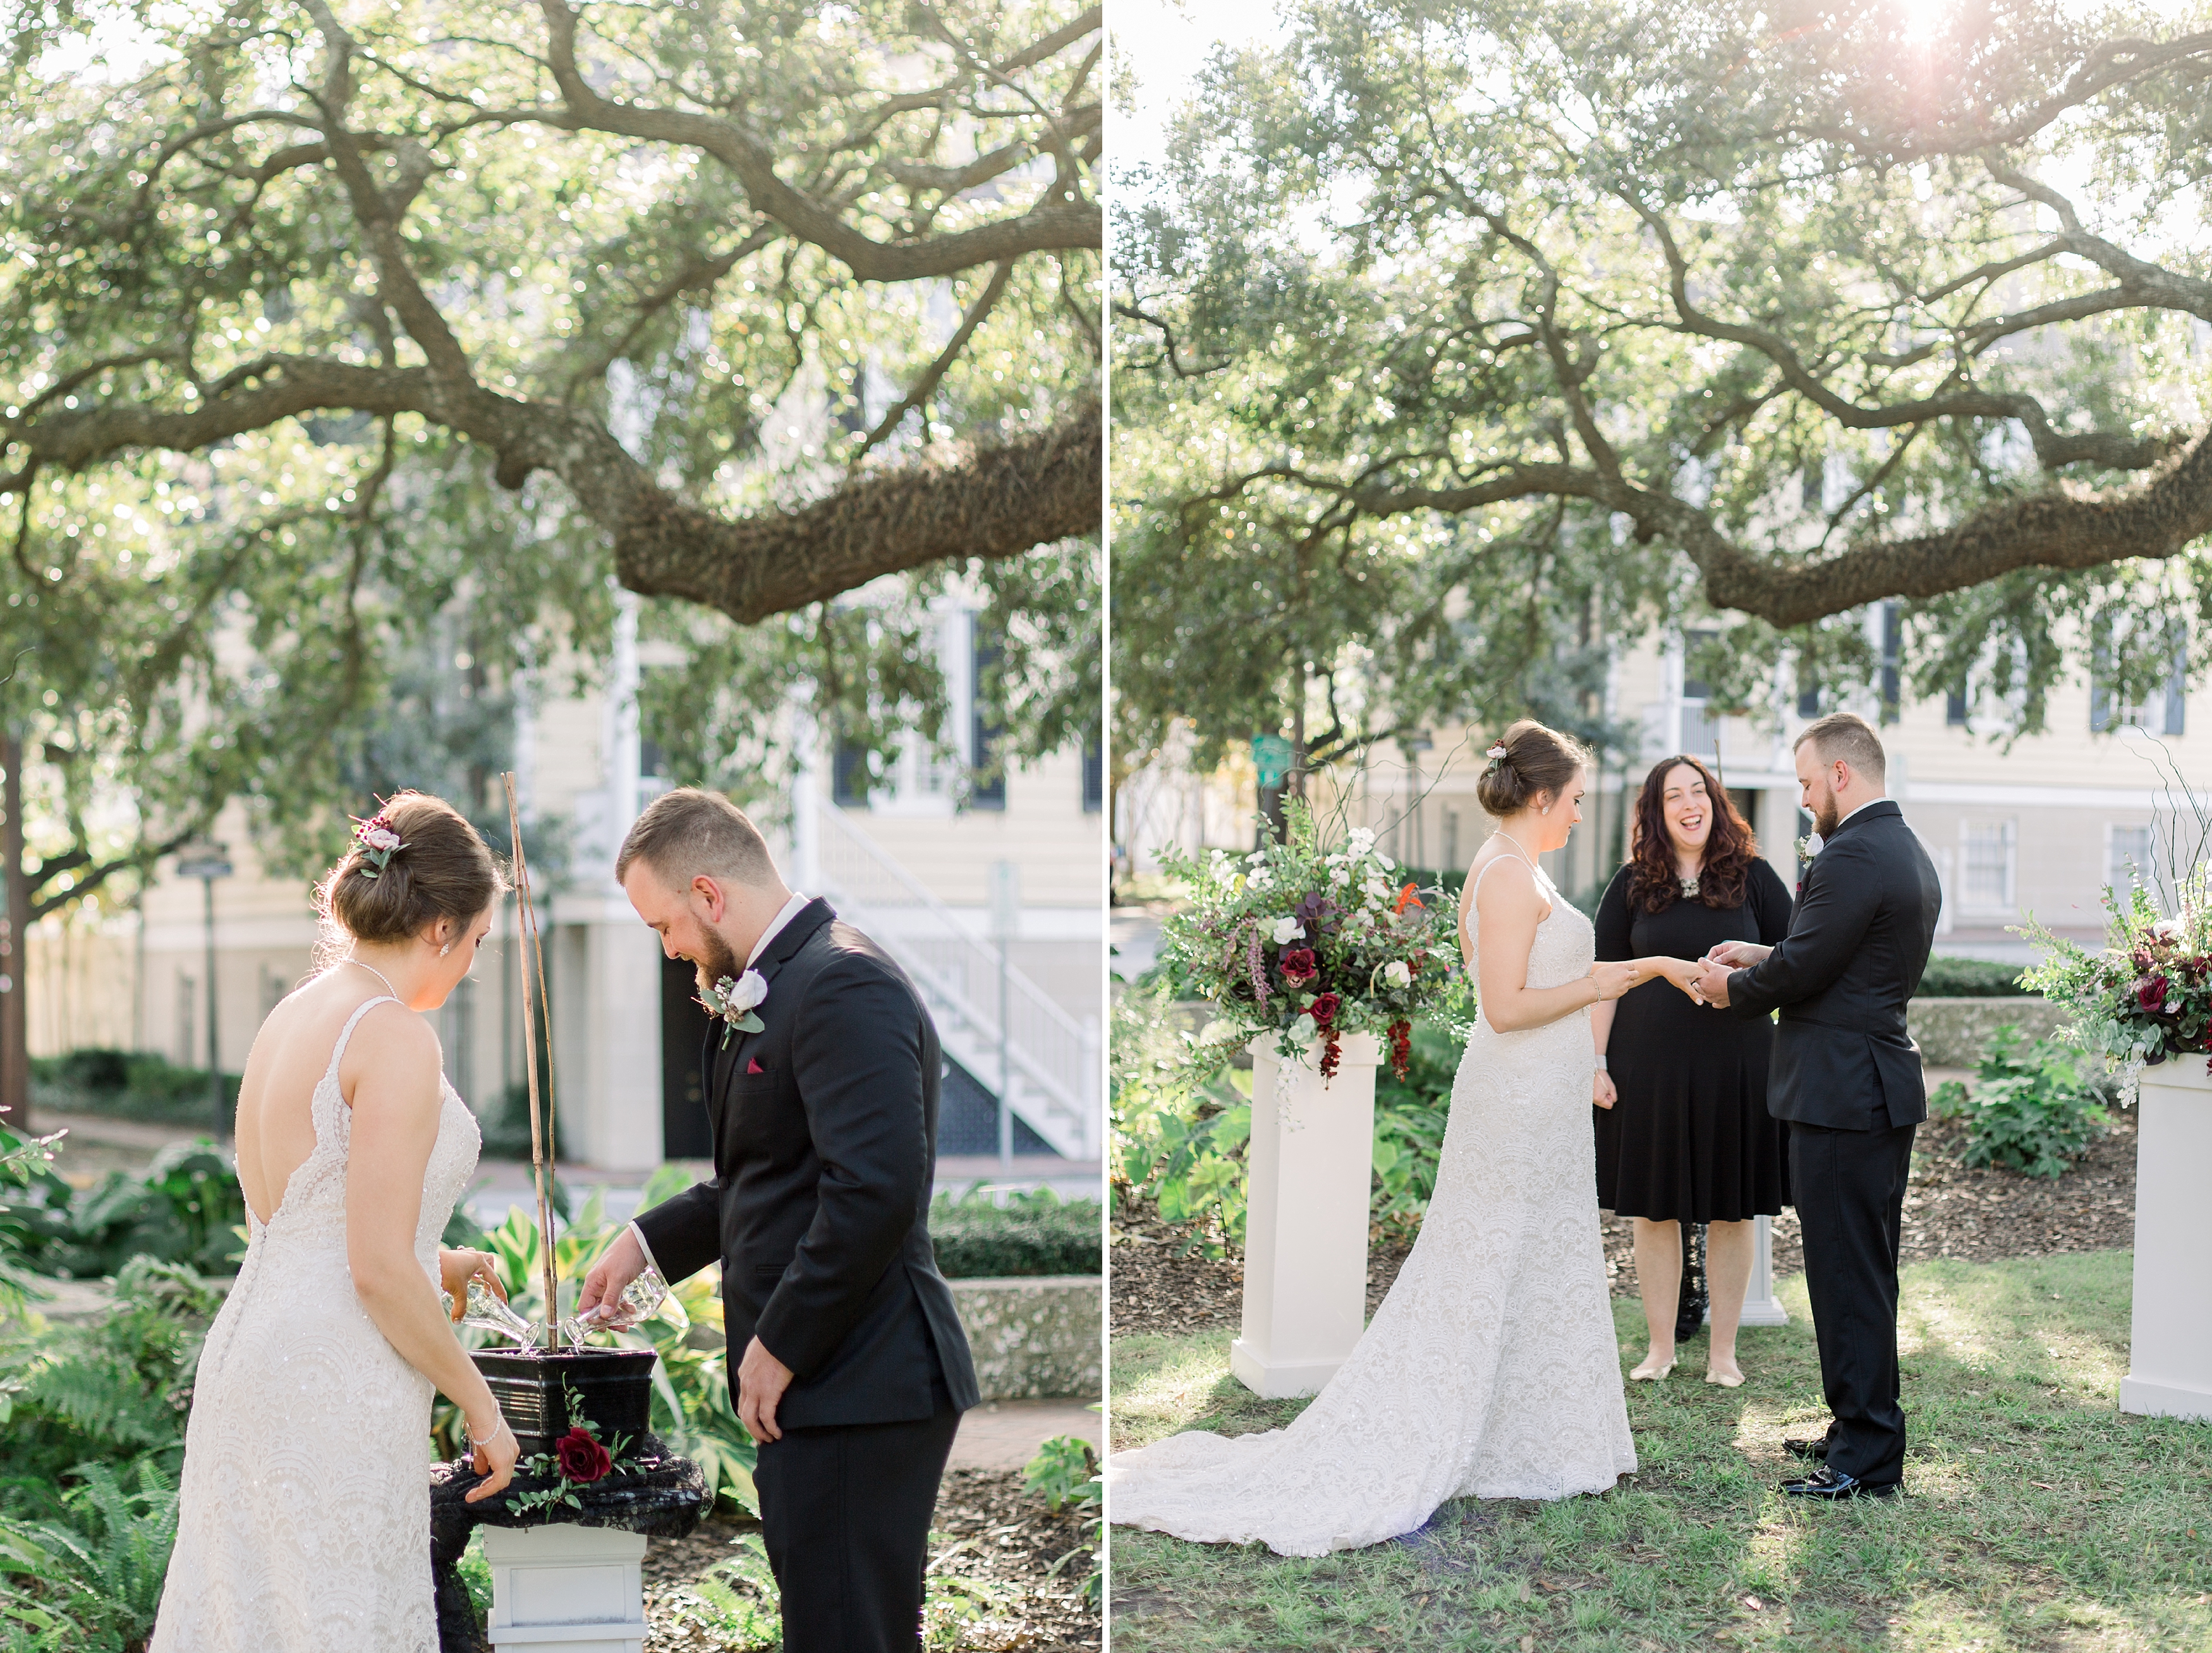 Outdoor ceremony in downtown Savannah.